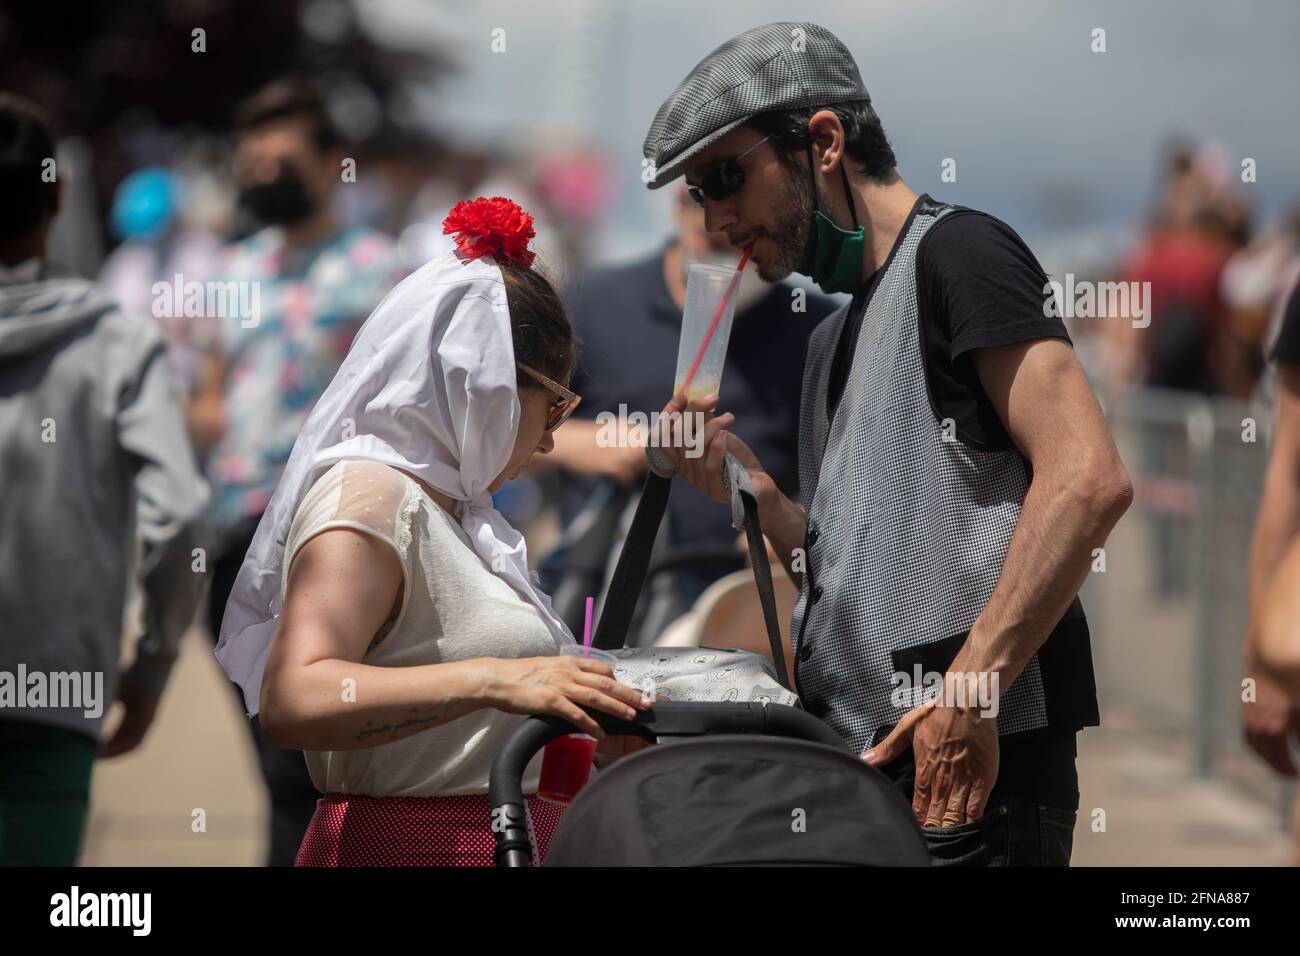 Madrid, Spain. 15th May, 2021. A couple dressed as chulapos seen during the San Isidro festivity in the IFEMA fairground.One of the most celebrated holidays of Madrid is the Feast Day of San Isidro which this year took place in the IFEMA fairground. Credit: SOPA Images Limited/Alamy Live News Stock Photo